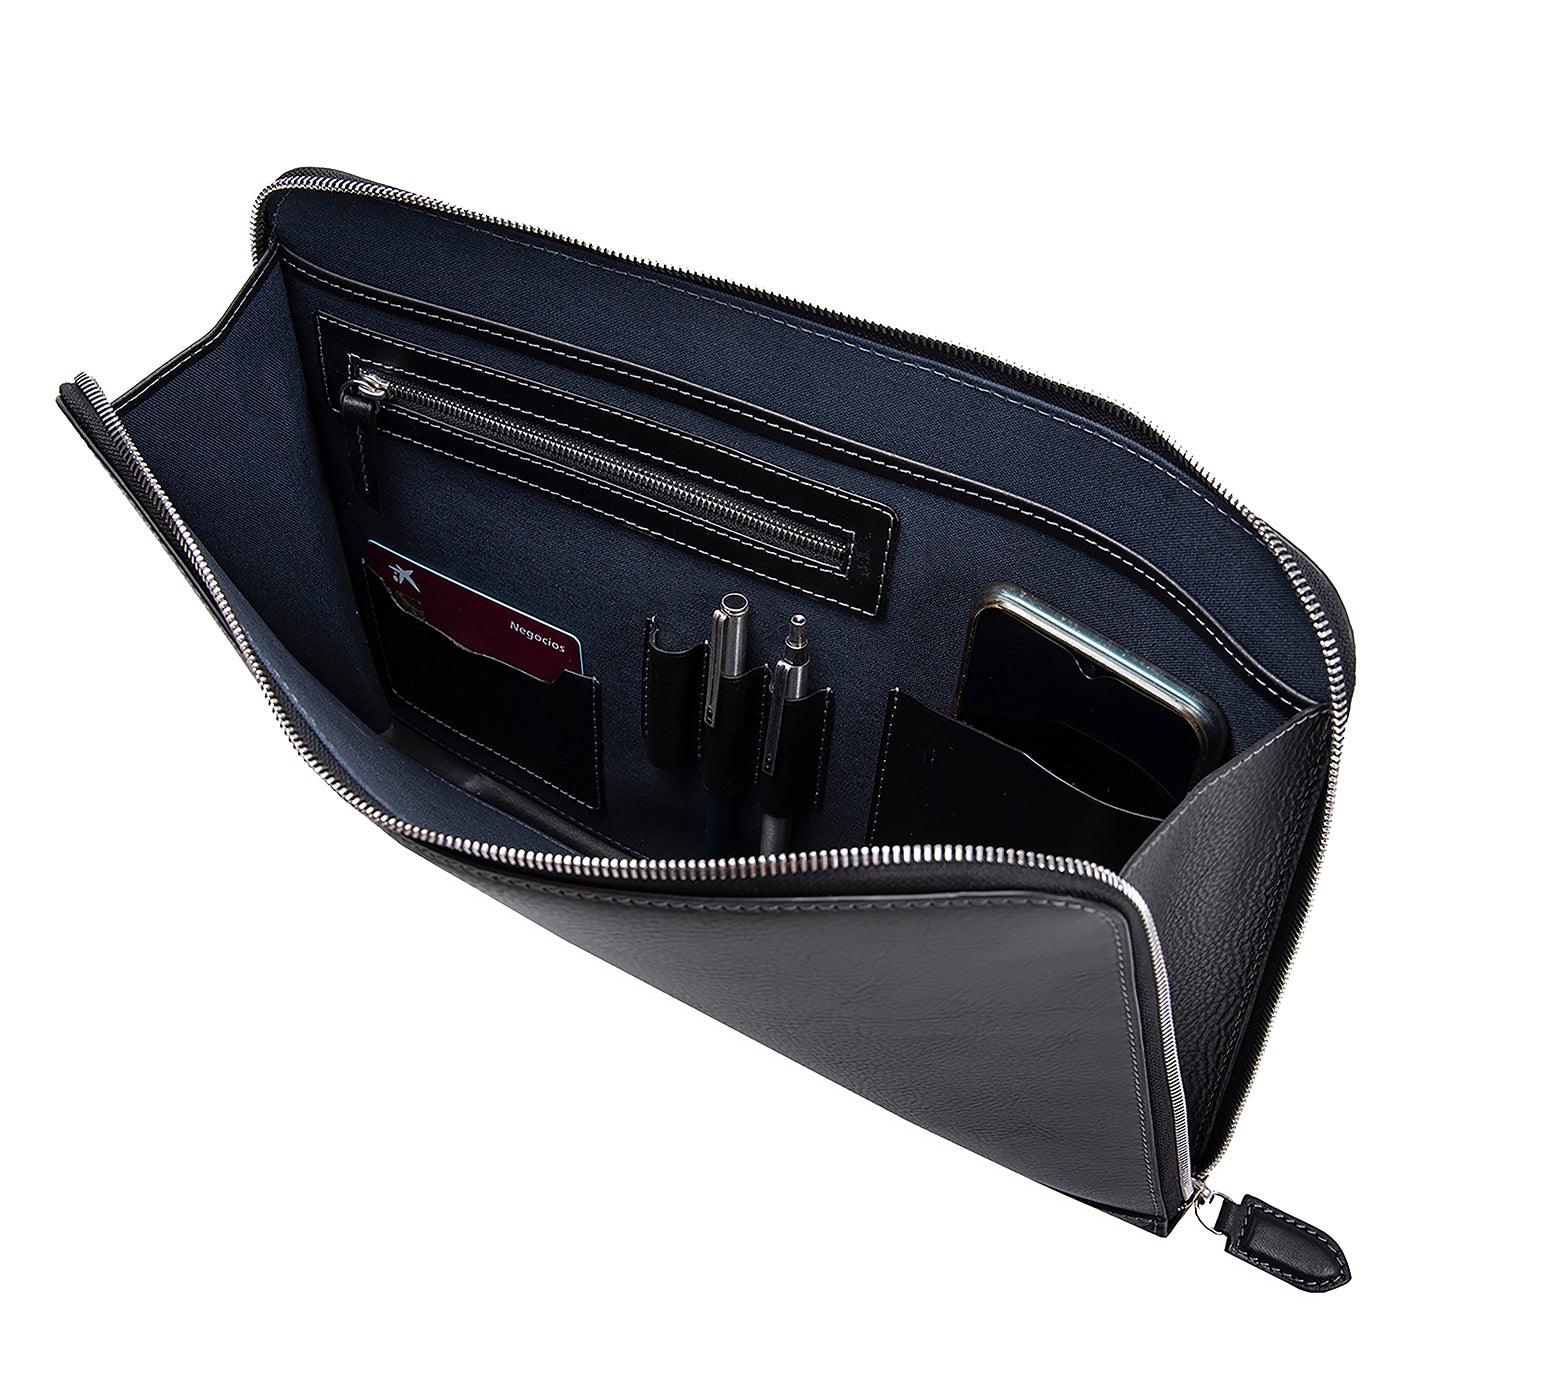 Albany Leather Document Holder from Rydal in 'Black' showing interior.